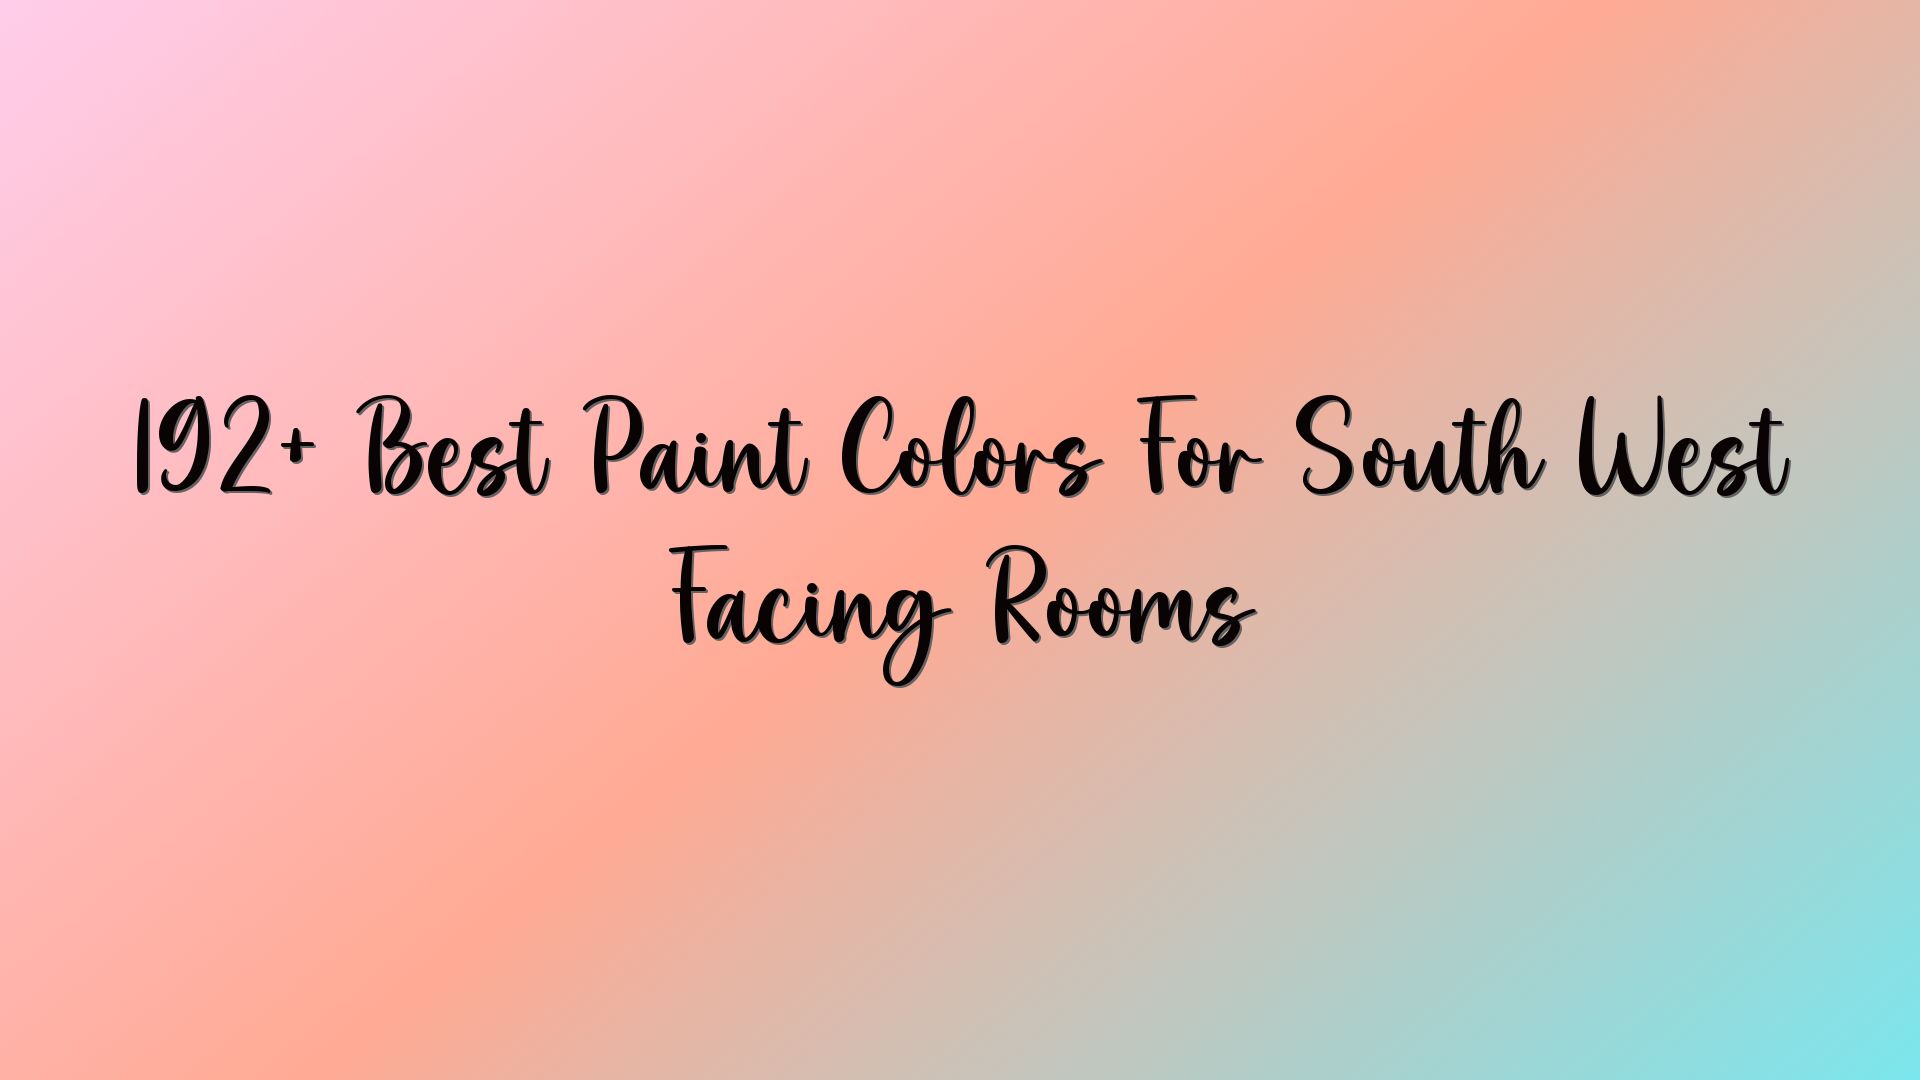 192+ Best Paint Colors For South West Facing Rooms